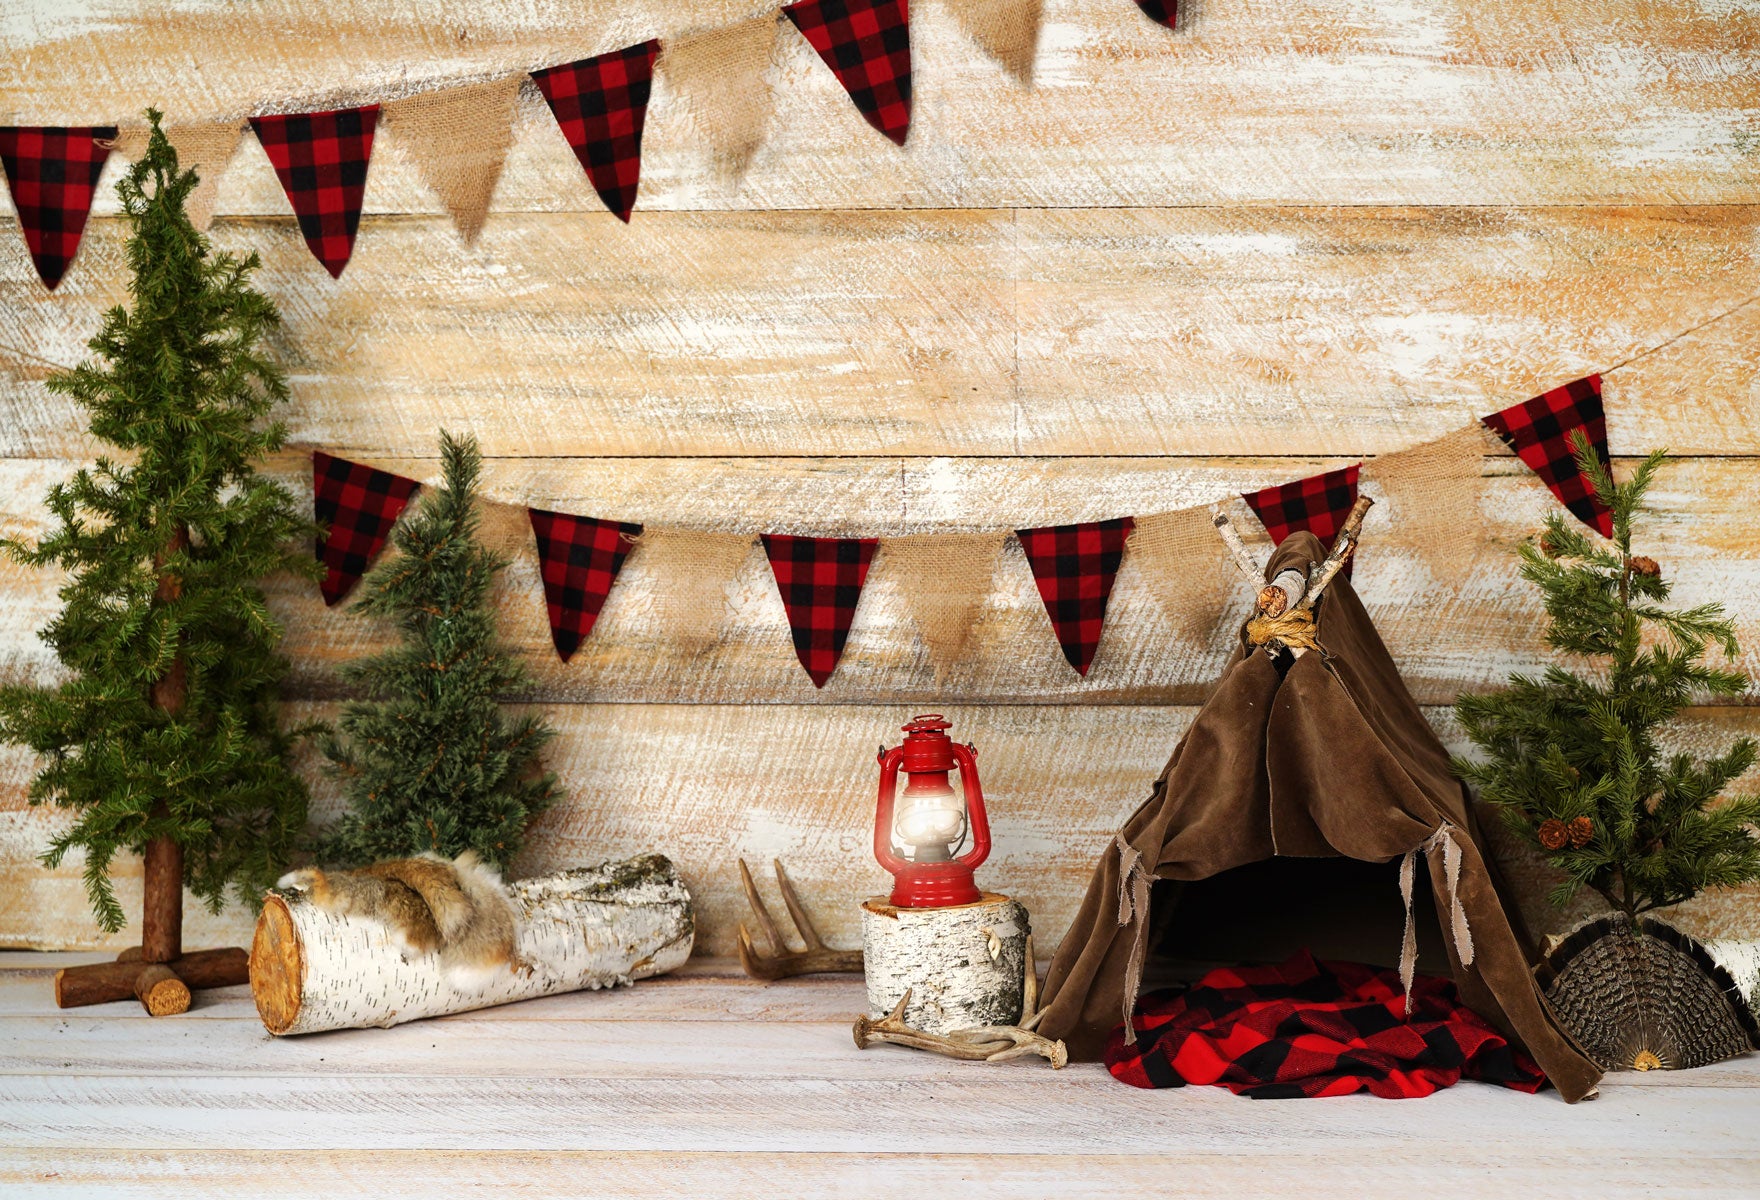 Kate Buffalo Plaid Adventures AK Backdrop for Photography designed by Arica Kirby